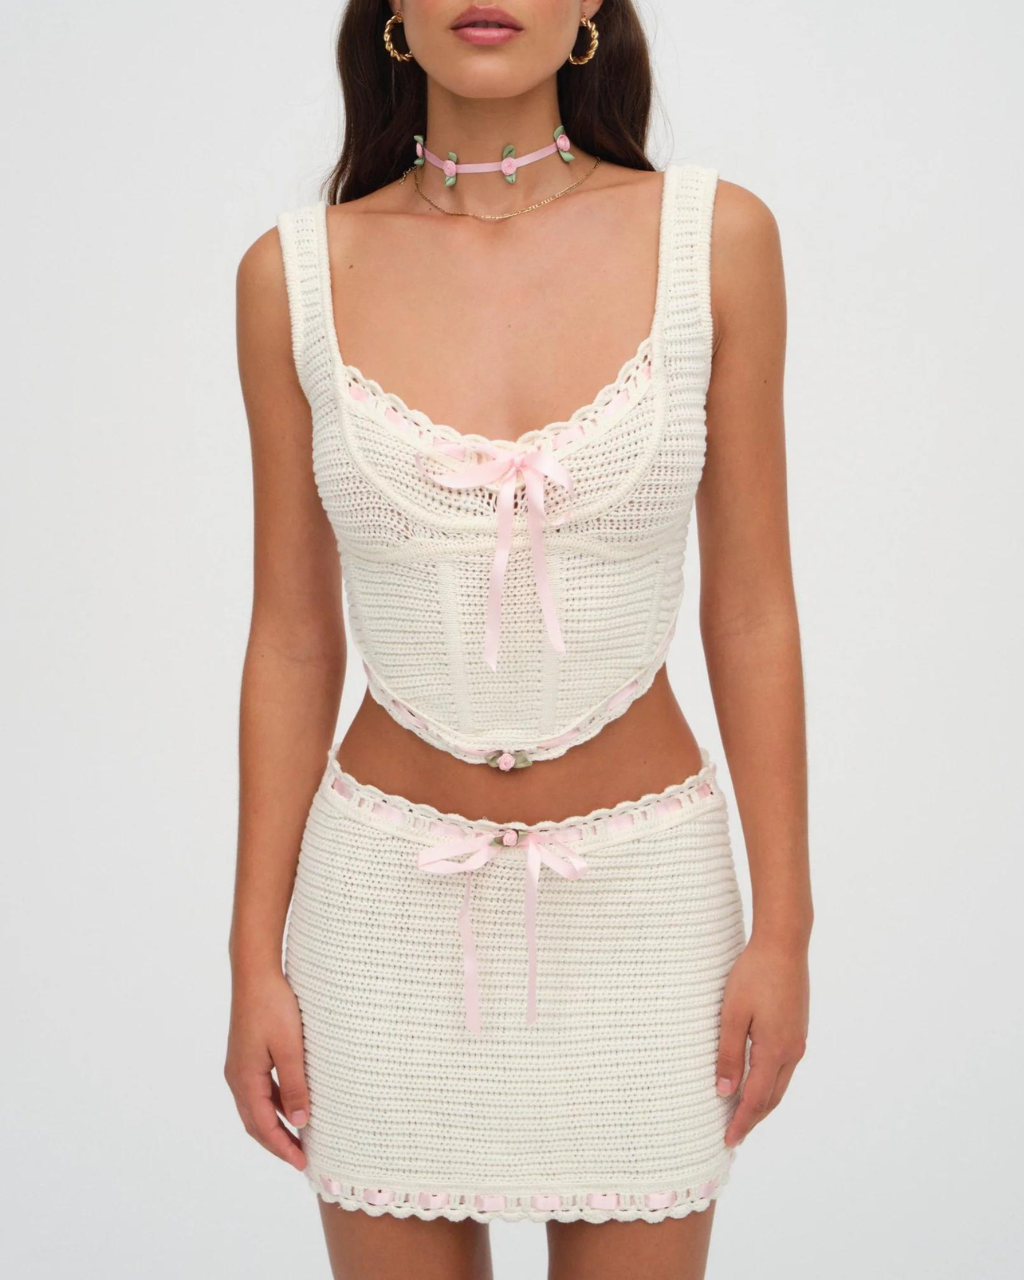 Olina Crochet Top Cream, Tank Blouse by For Love and Lemons | LIT Boutique